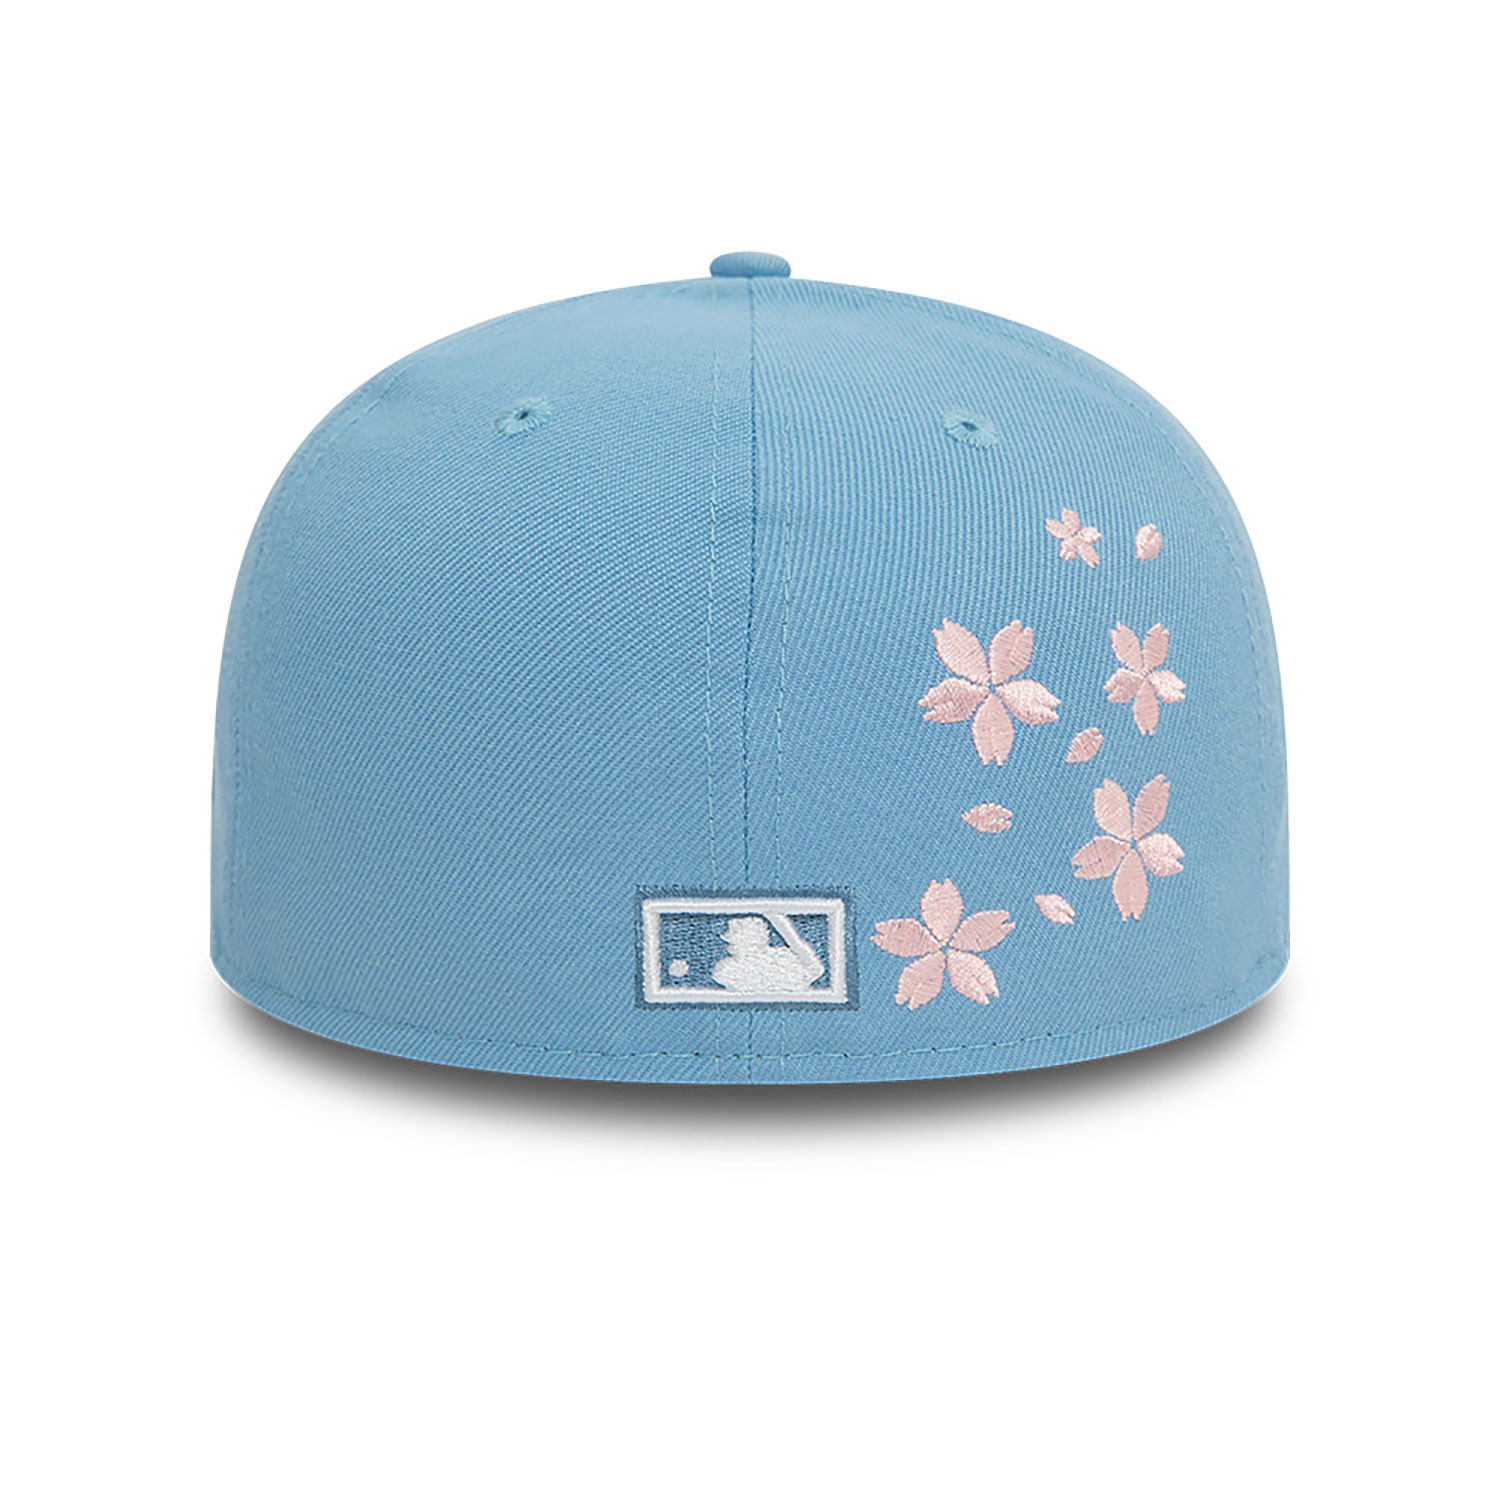 New York Yankees Cherry Blossom Light Blue 59FIFTY Low Profile Cap